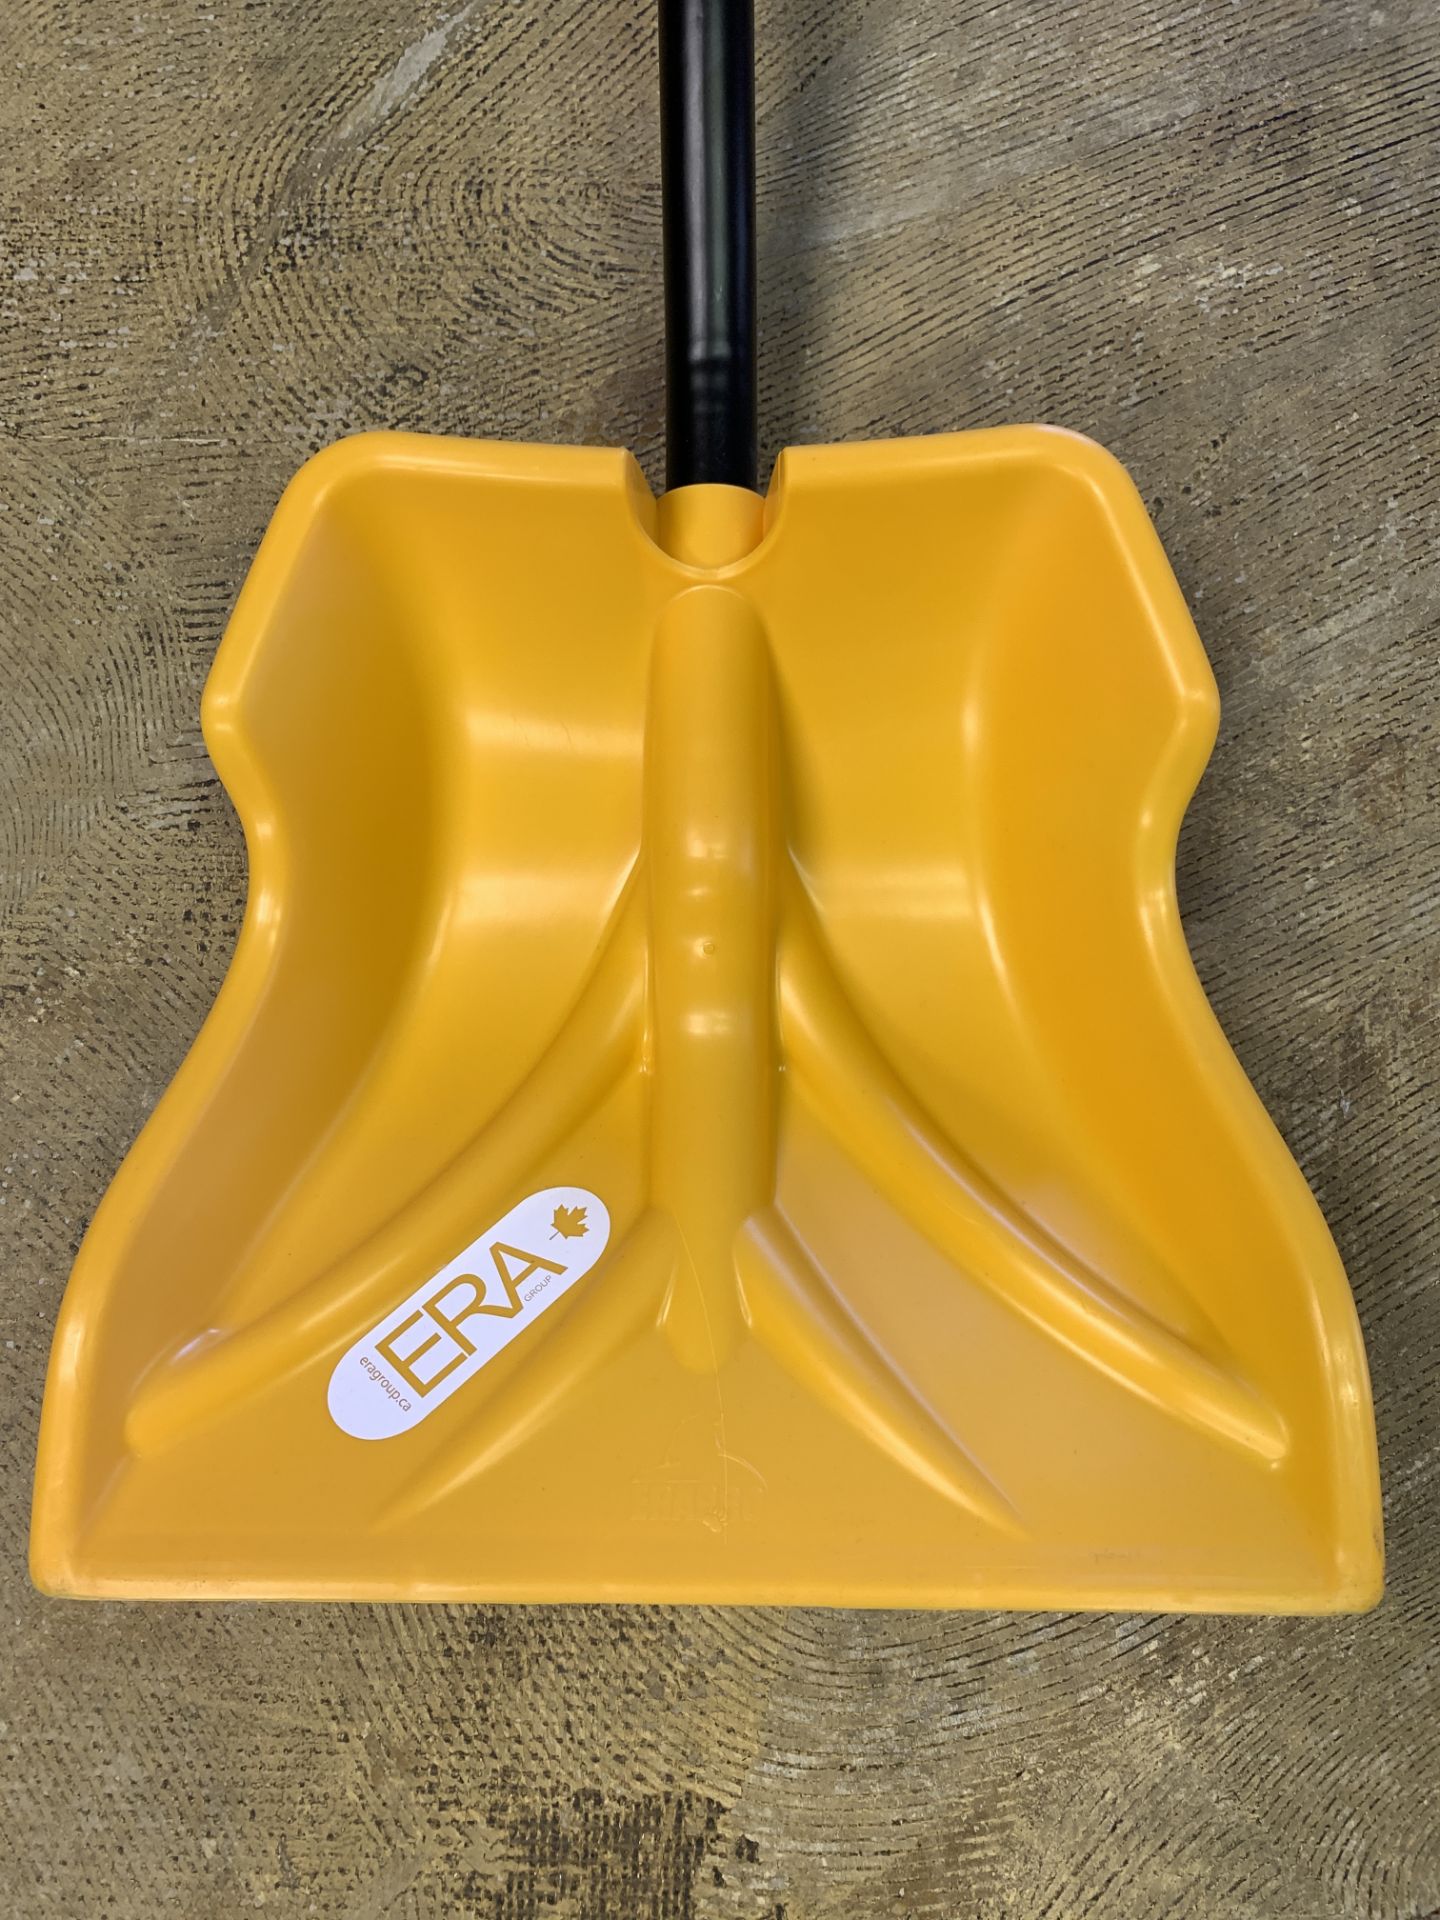 SNOW SHOVEL 51" X 19.5" WIDE, ERA GROUP, NEW, MADE IN CANADA - Image 4 of 7